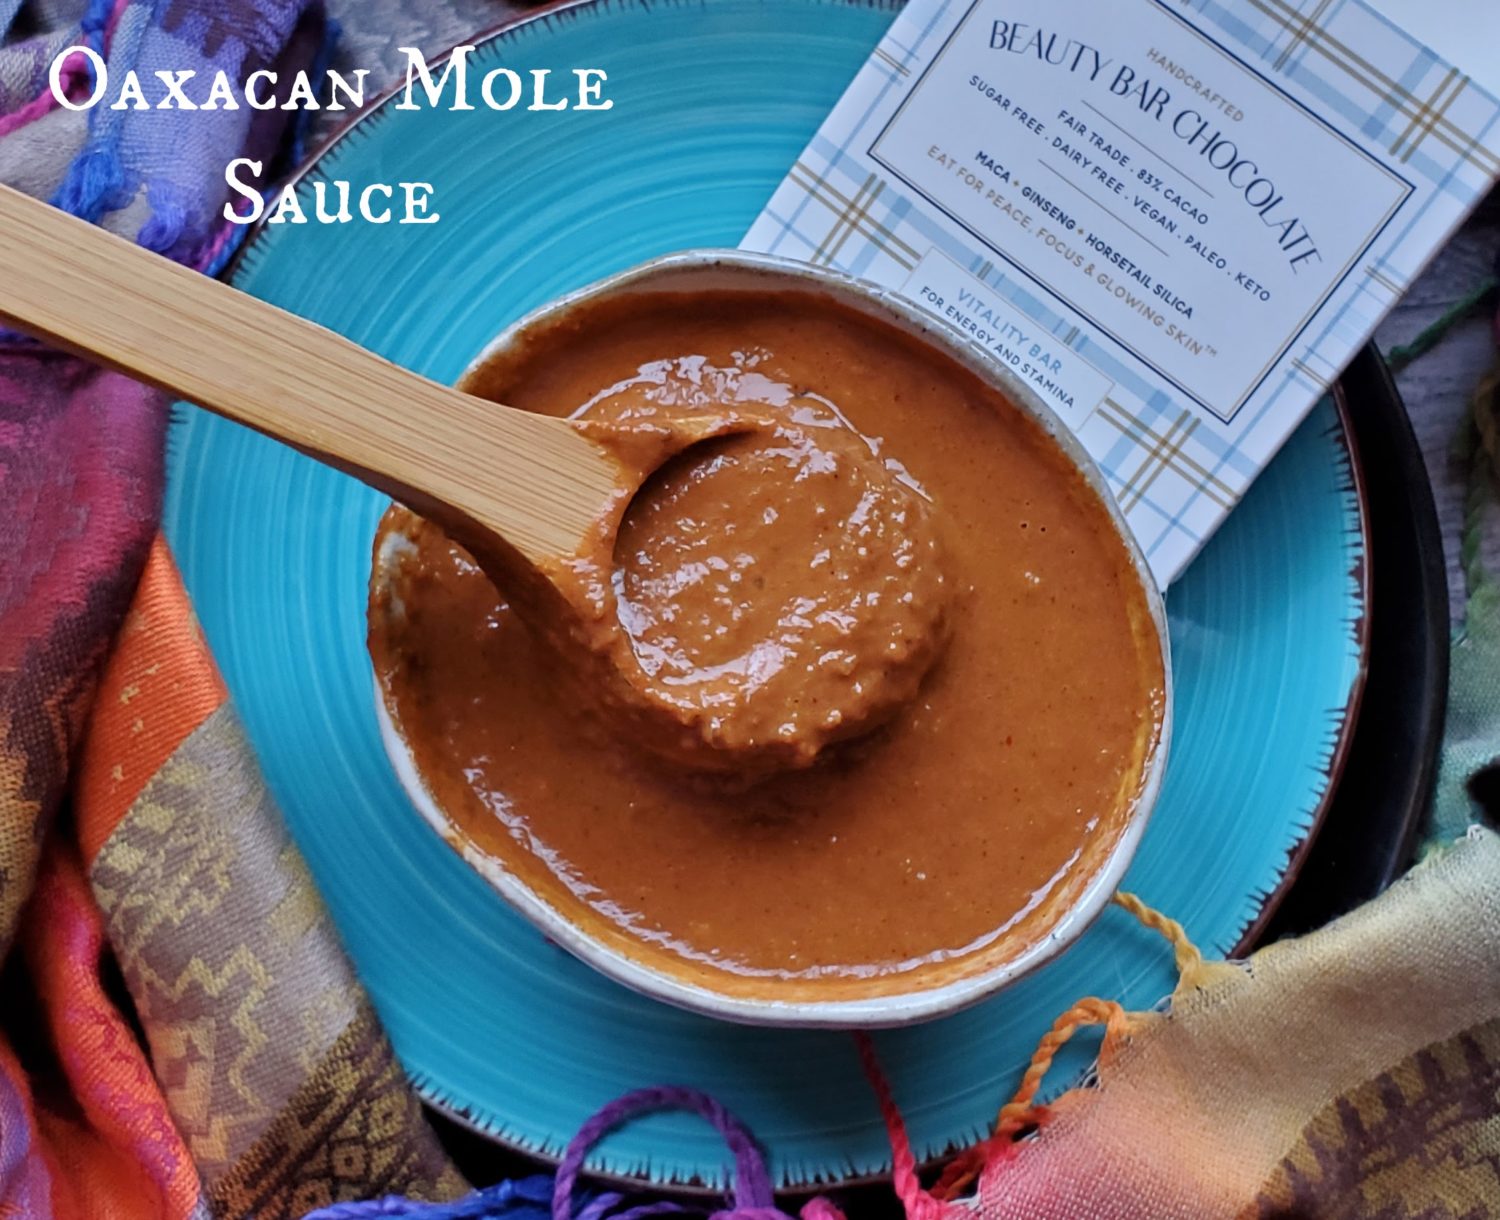 Oaxacan Mole Sauce: A deeply flavorful "days" simmered sauce made in under 1 hour, perfect for roasted veggies, rice, or meat dishes.